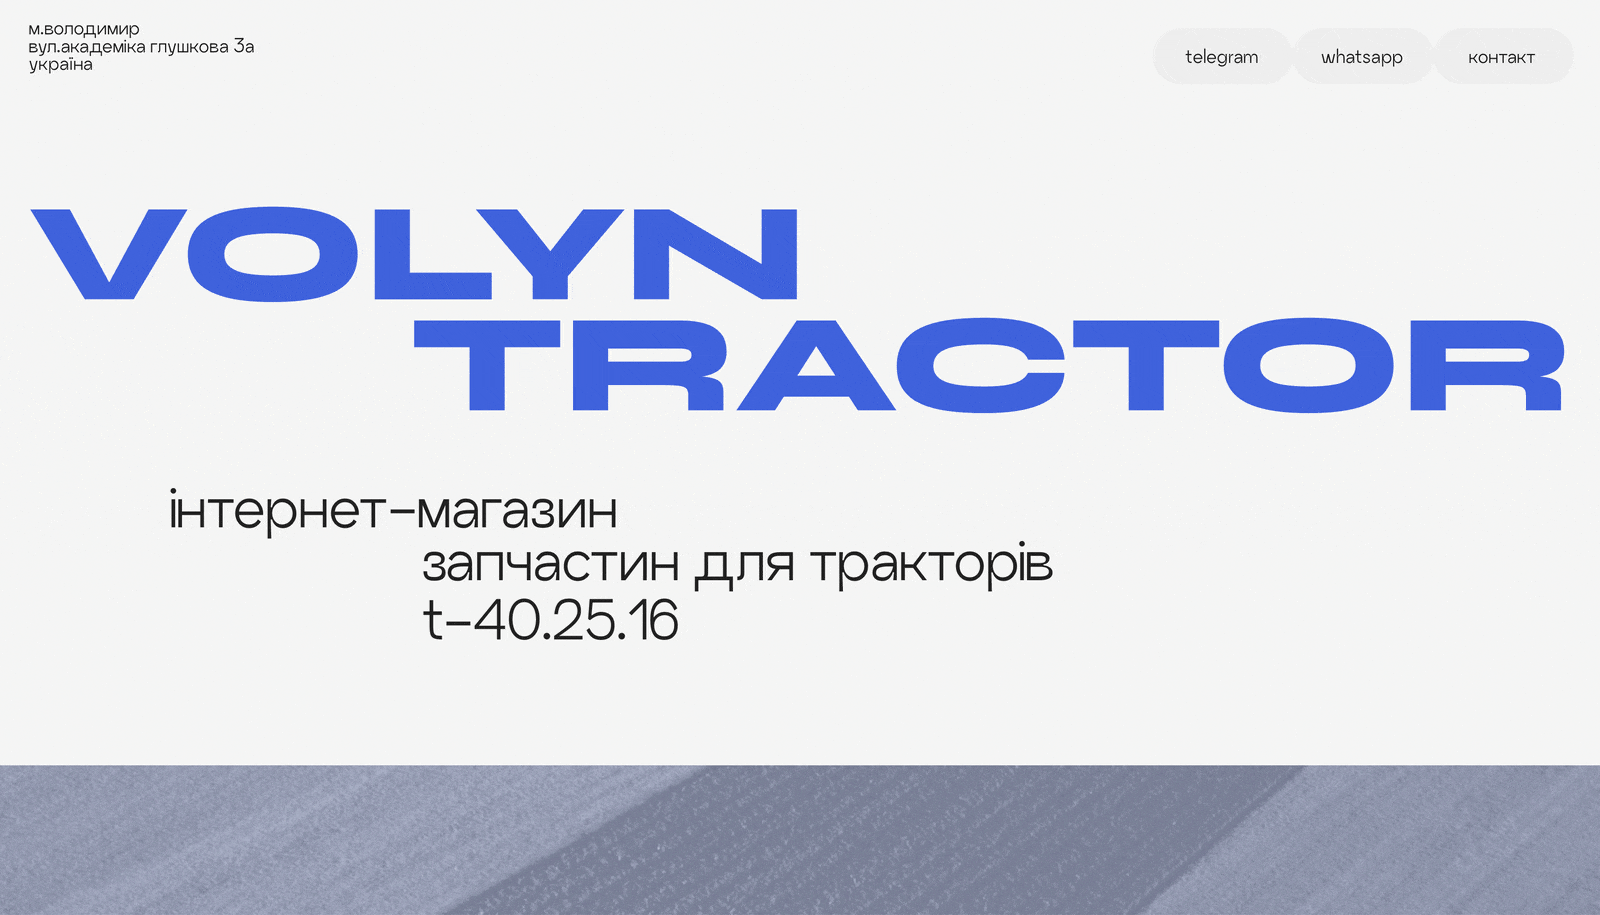 Readymag blog_The Volyn Tractor website by Andreas Smolyarson